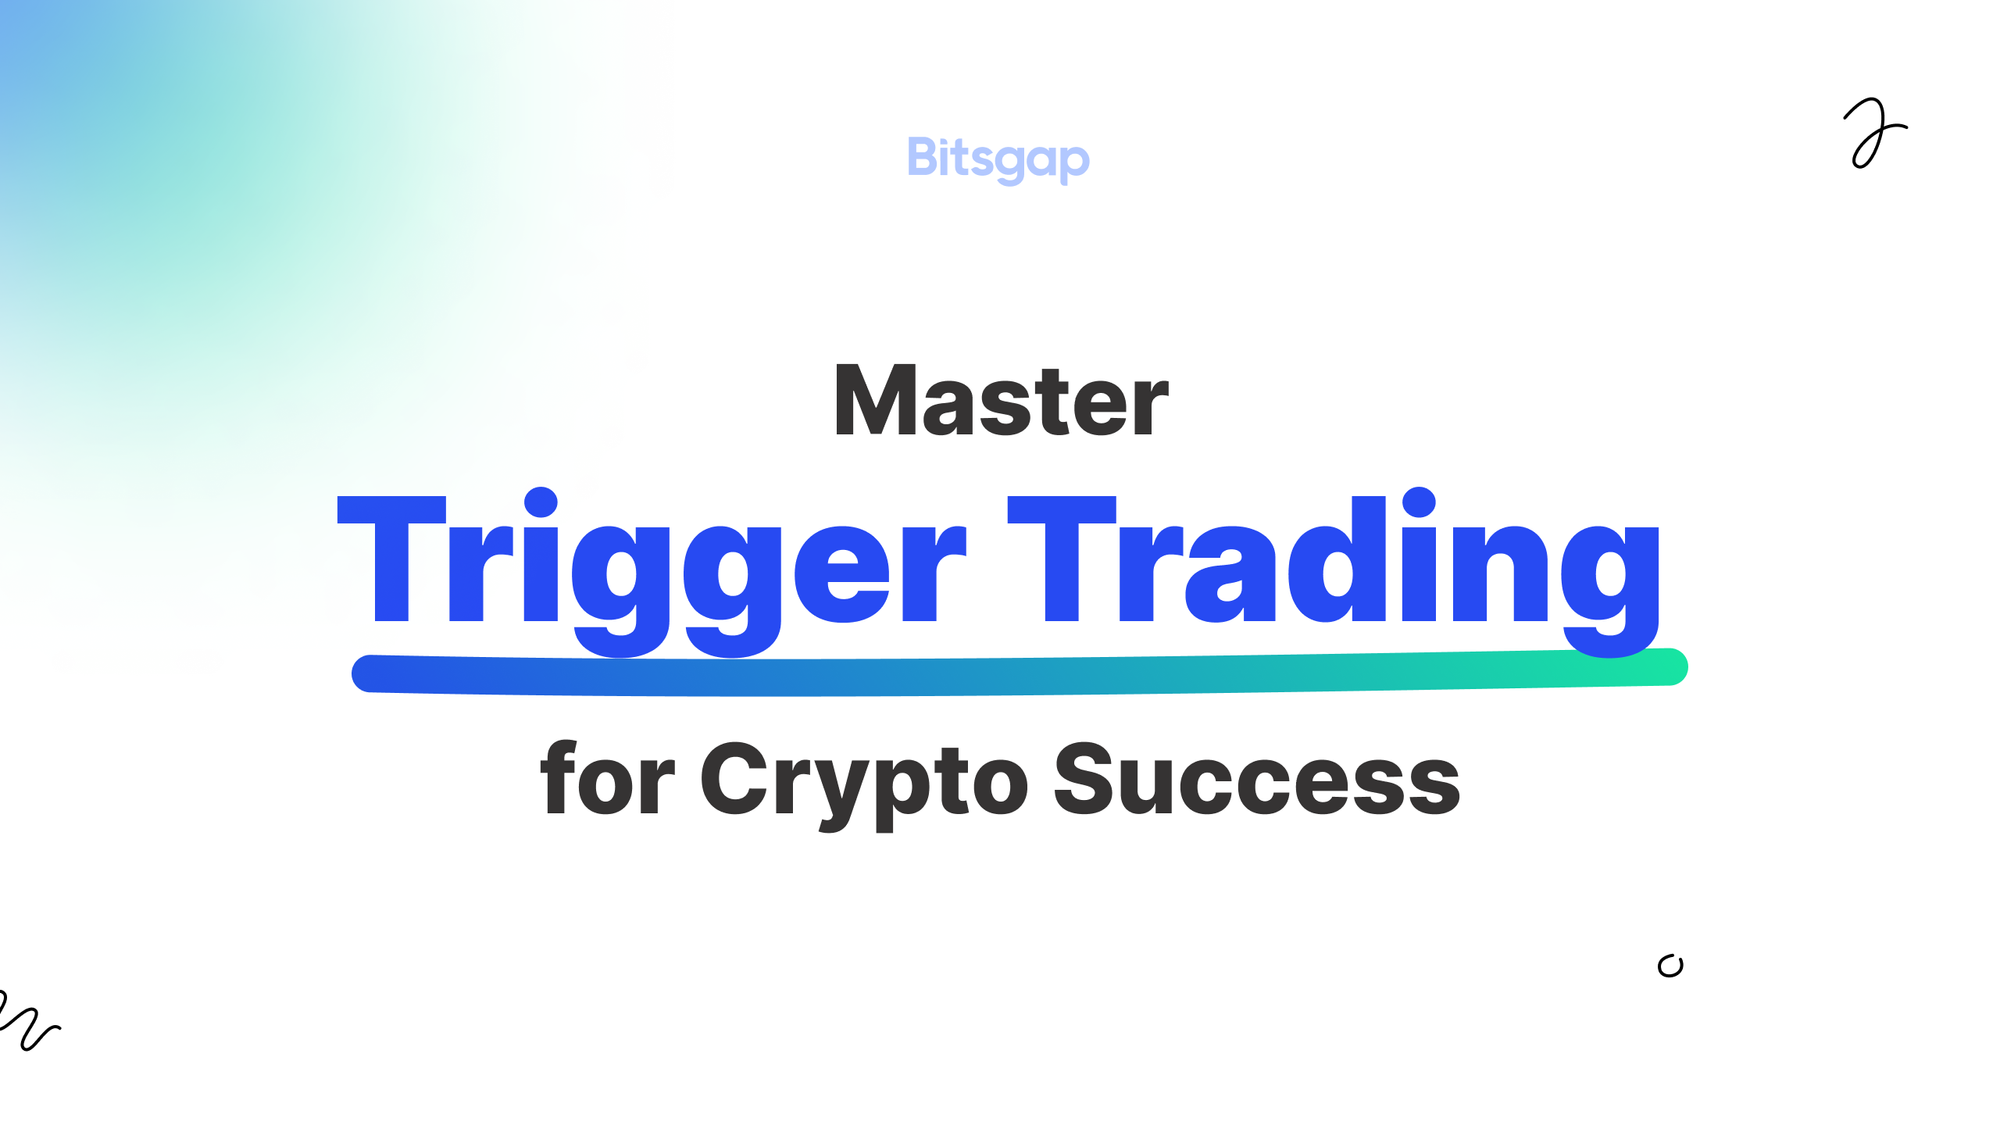 Perfect Your Trading With Triggers